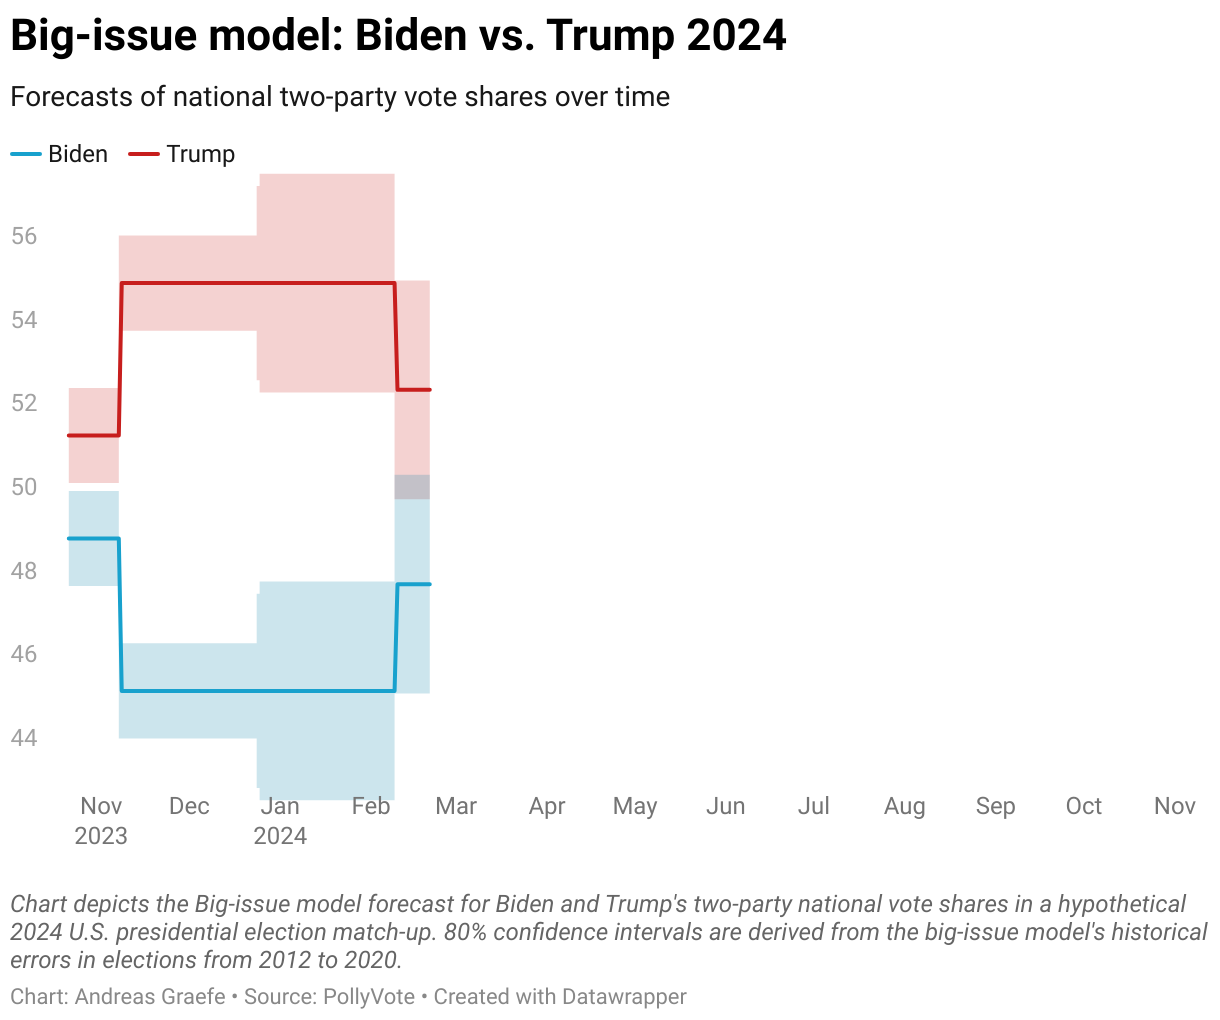 Chart depicts the big-issue model forecast for Biden and Trump's two-party national vote shares.